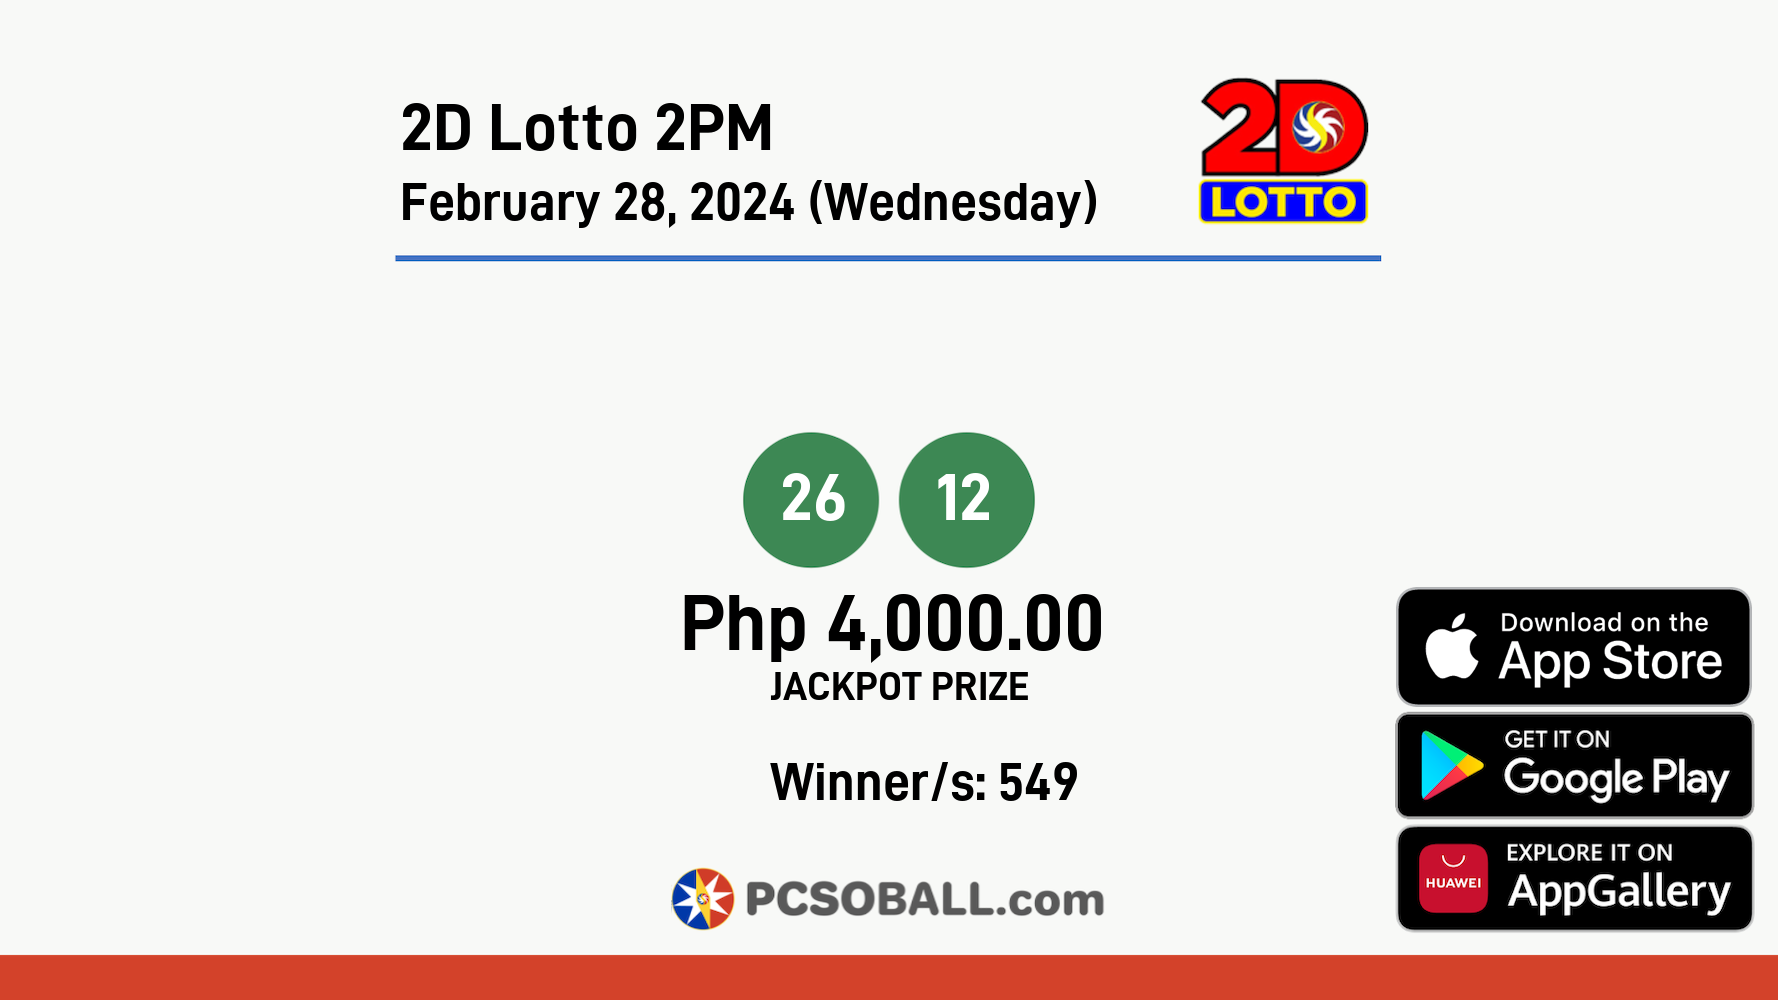 2D Lotto 2PM February 28, 2024 (Wednesday) Result